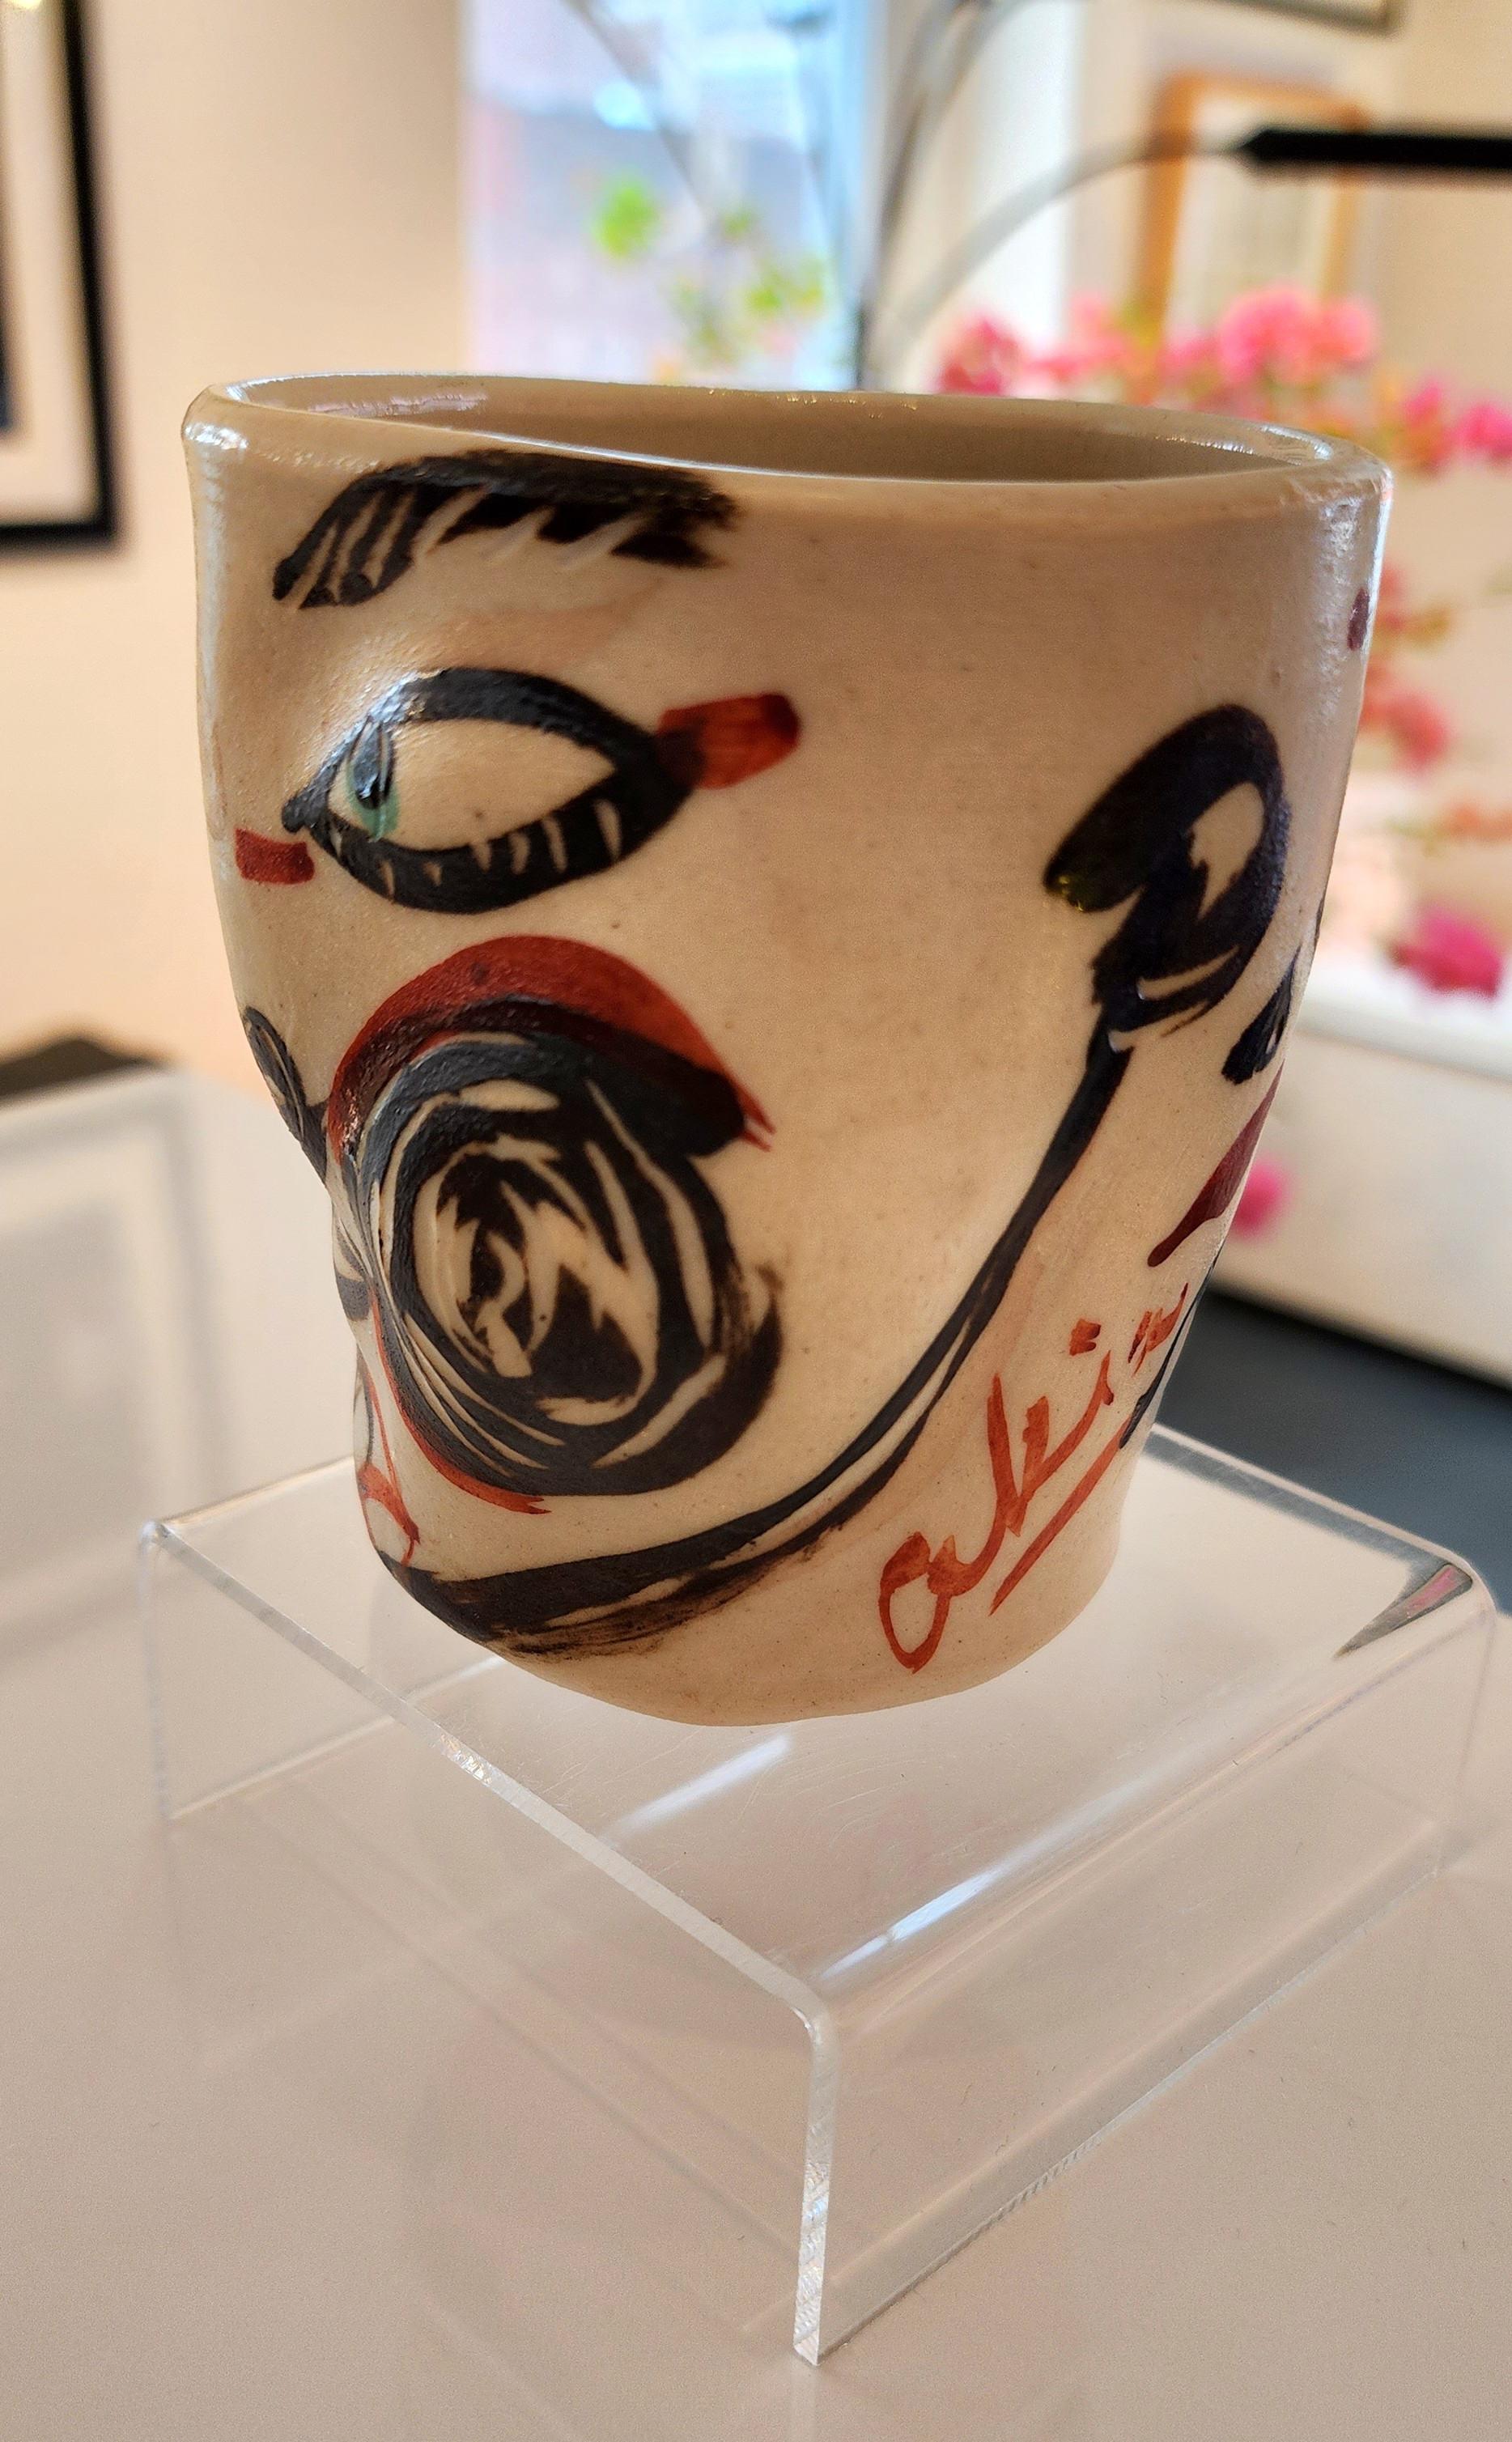 Cup with Face (Modern Ceramics) - Impressionist Sculpture by Akio Takamori